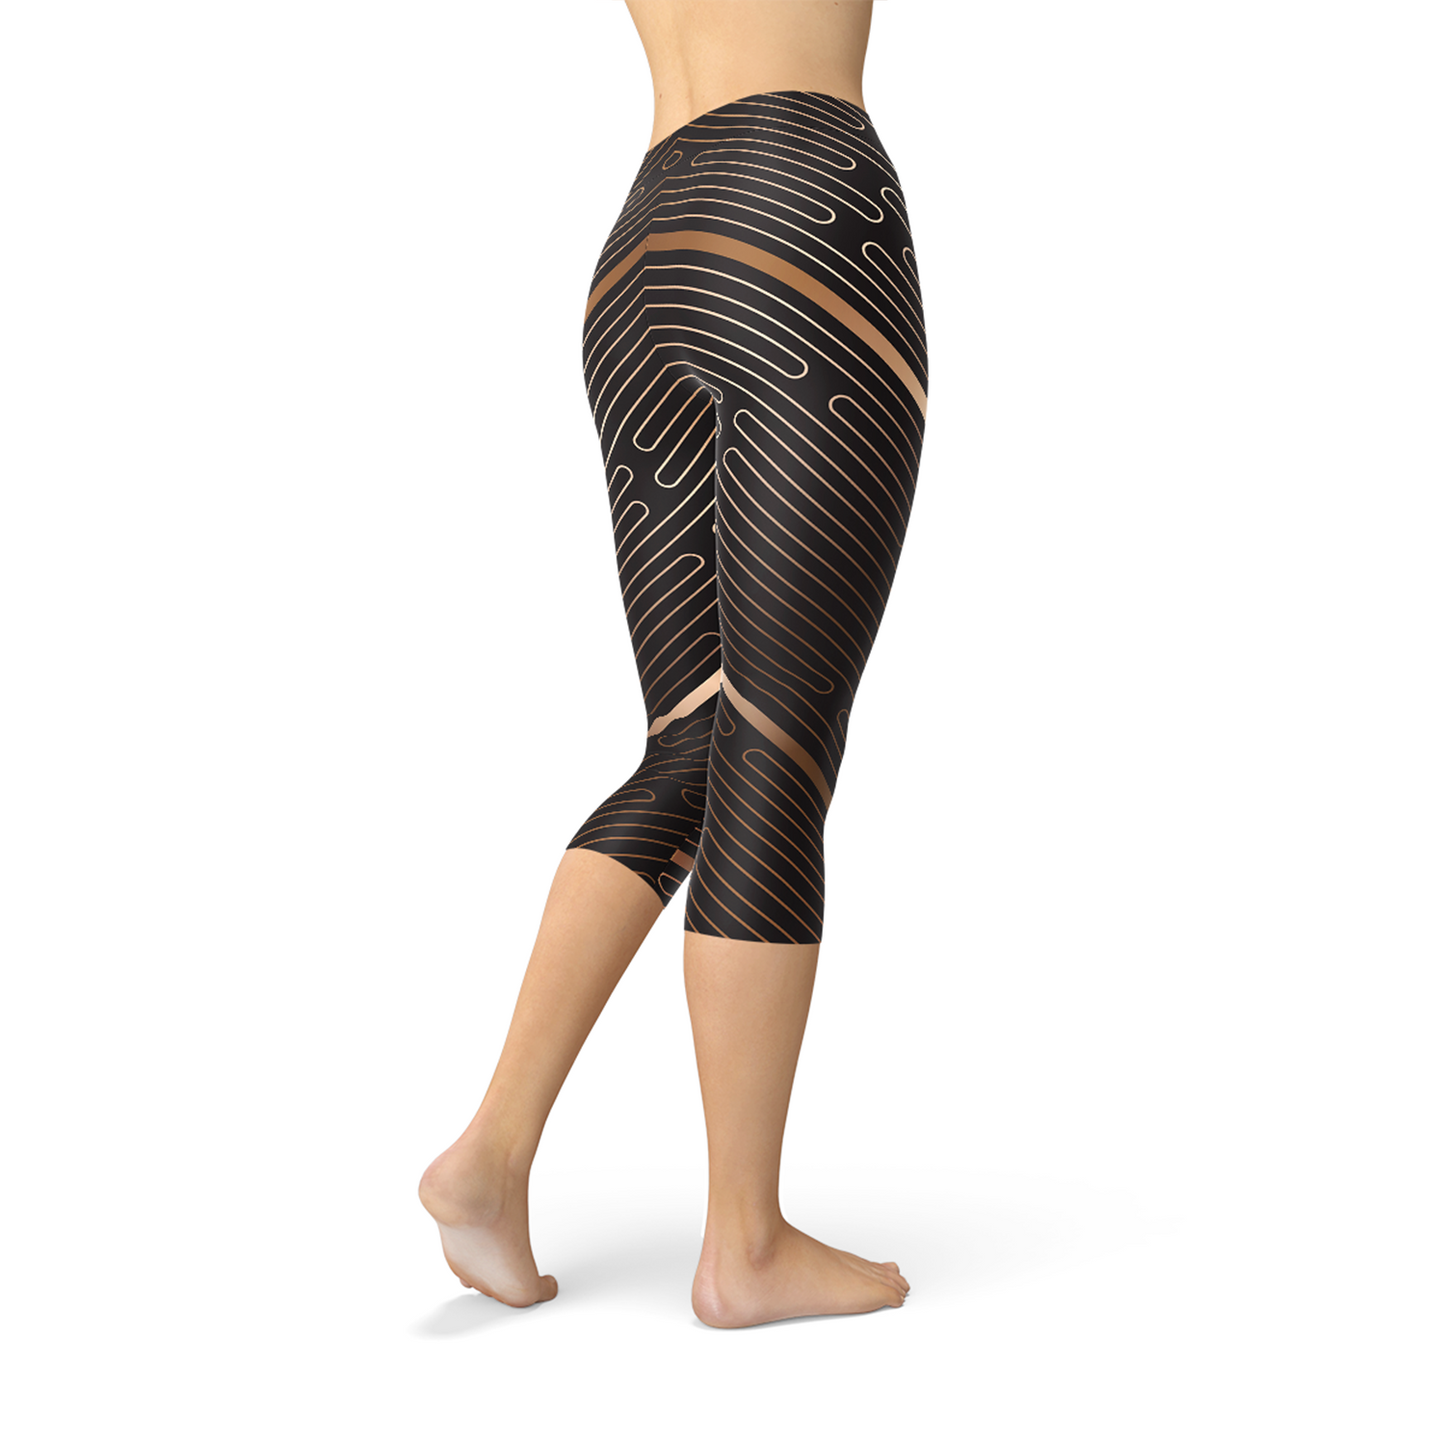 Stay stylish and comfortable in our brown capri leggings, perfect for active days or casual wear.